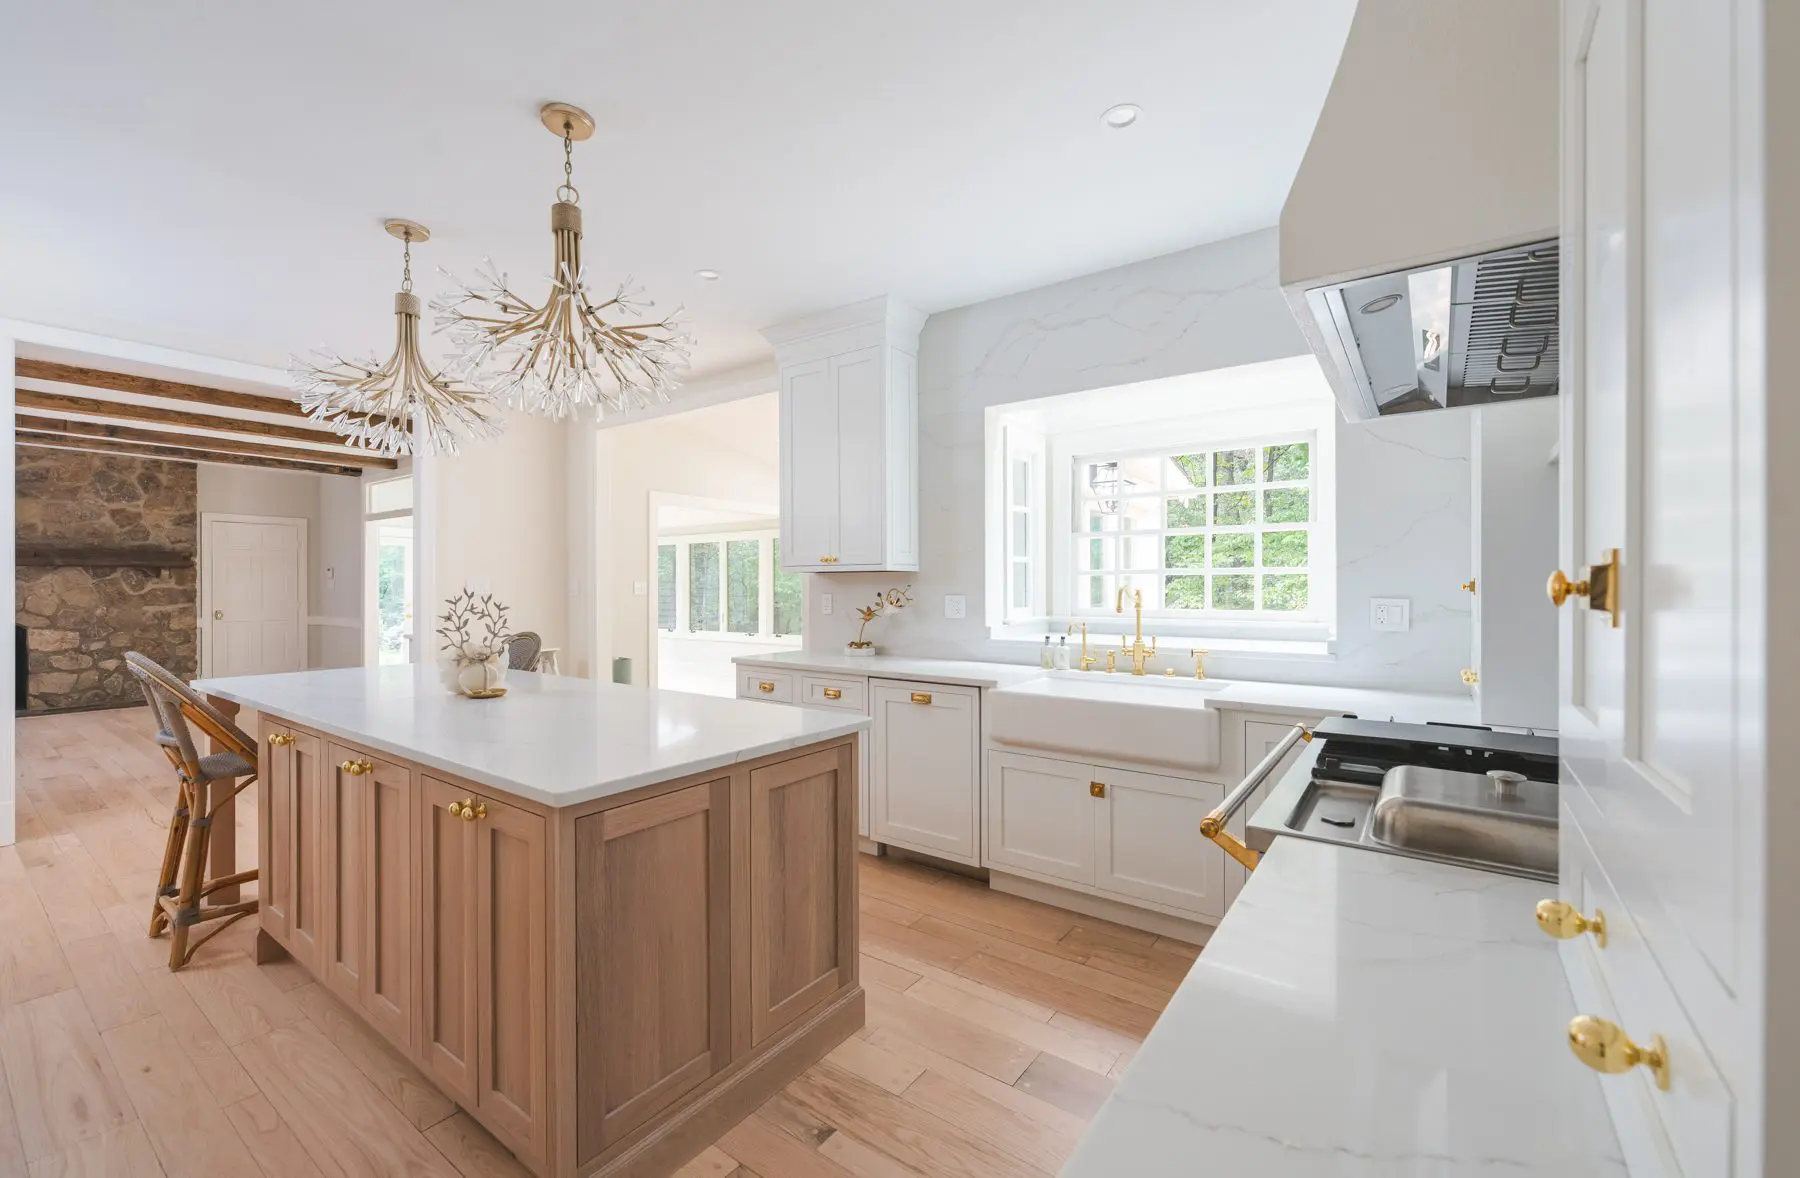 KITCHEN REMODELING IN CHEVY CHASE, MD